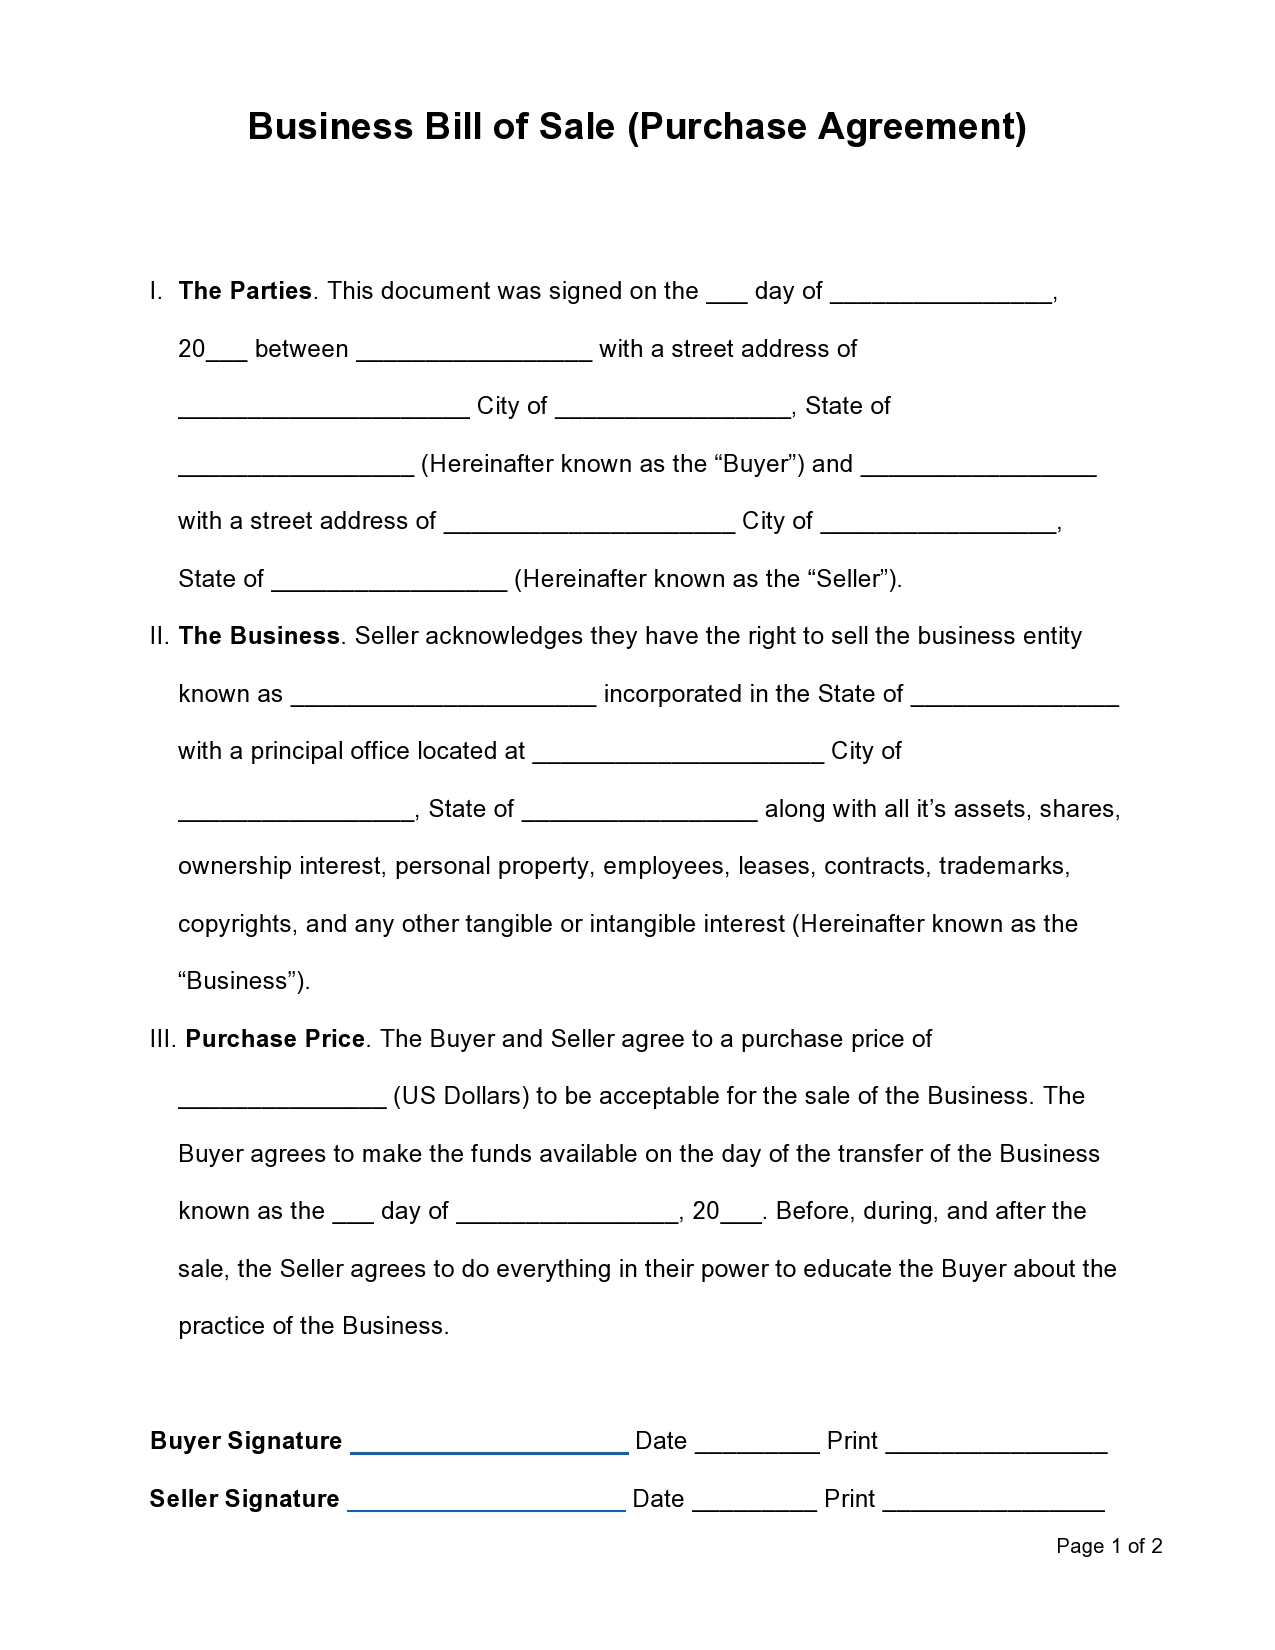 Free business purchase agreement 03